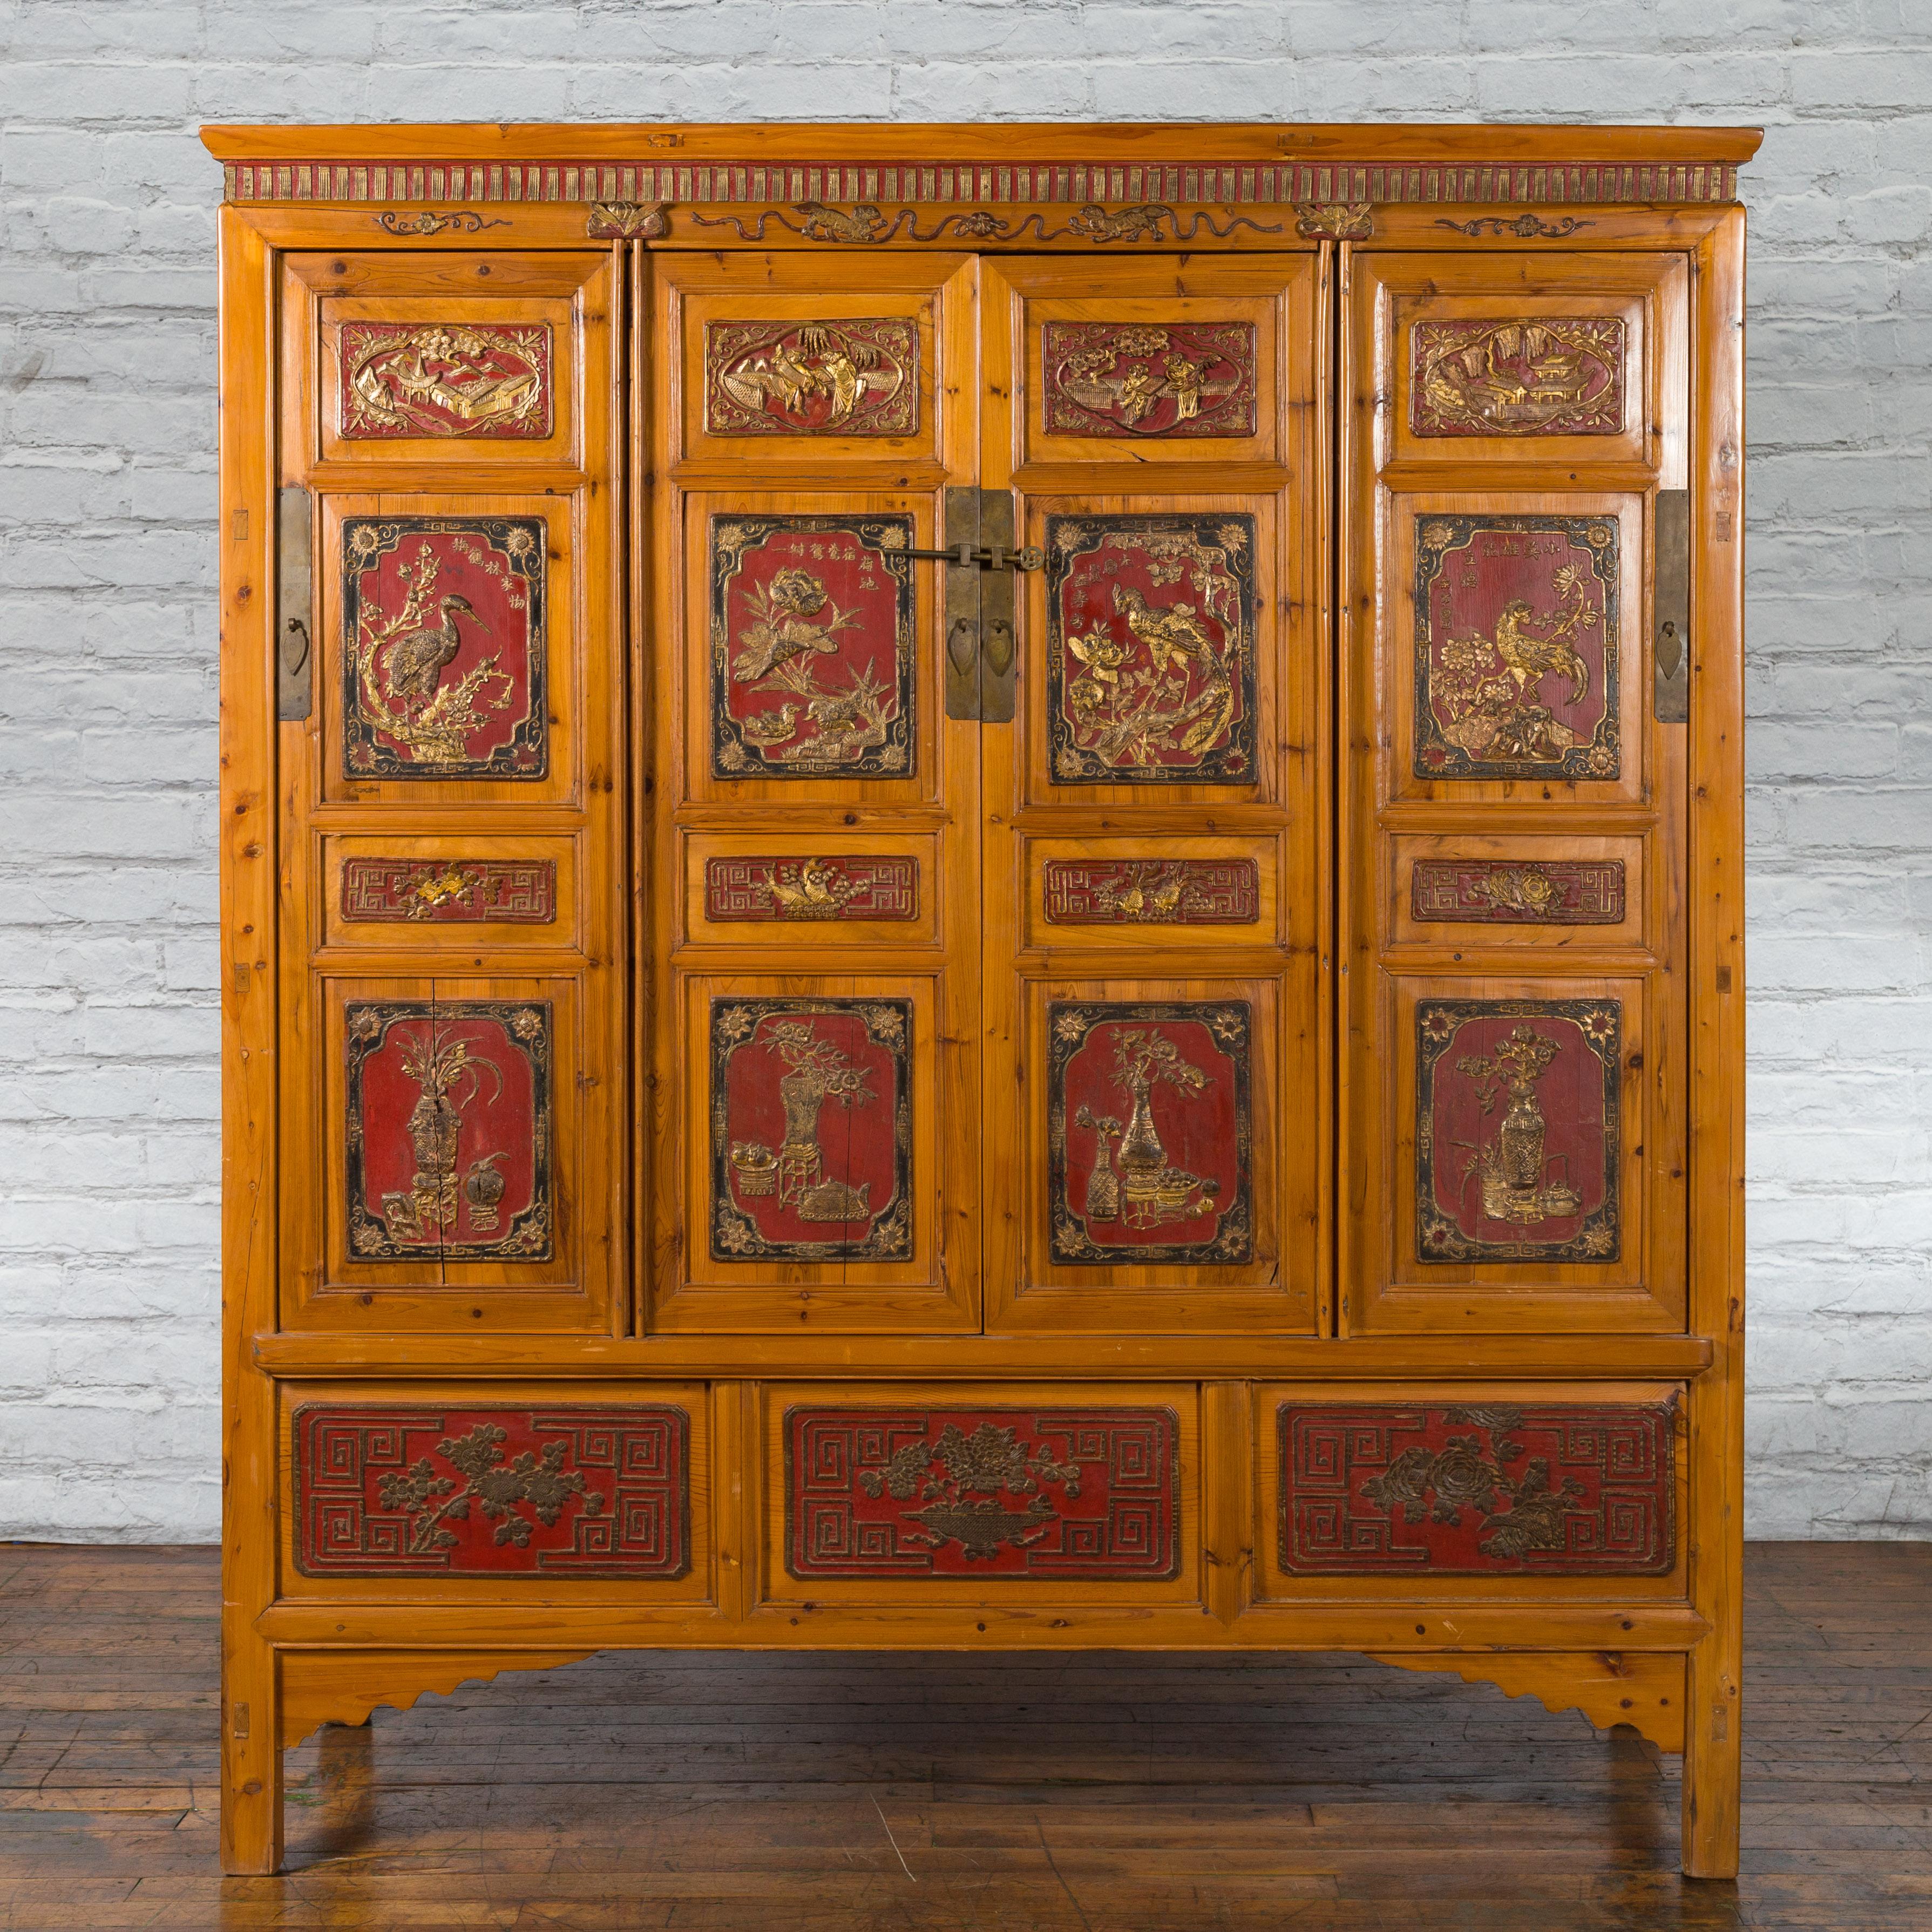 A Chinese Qing Dynasty period wide and large cabinet from the 19th century, with hand-carved and gilt panels. Created in China during the Qing Dynasty, this large and wide cabinet features a carved cornice sitting above four doors, adorned with